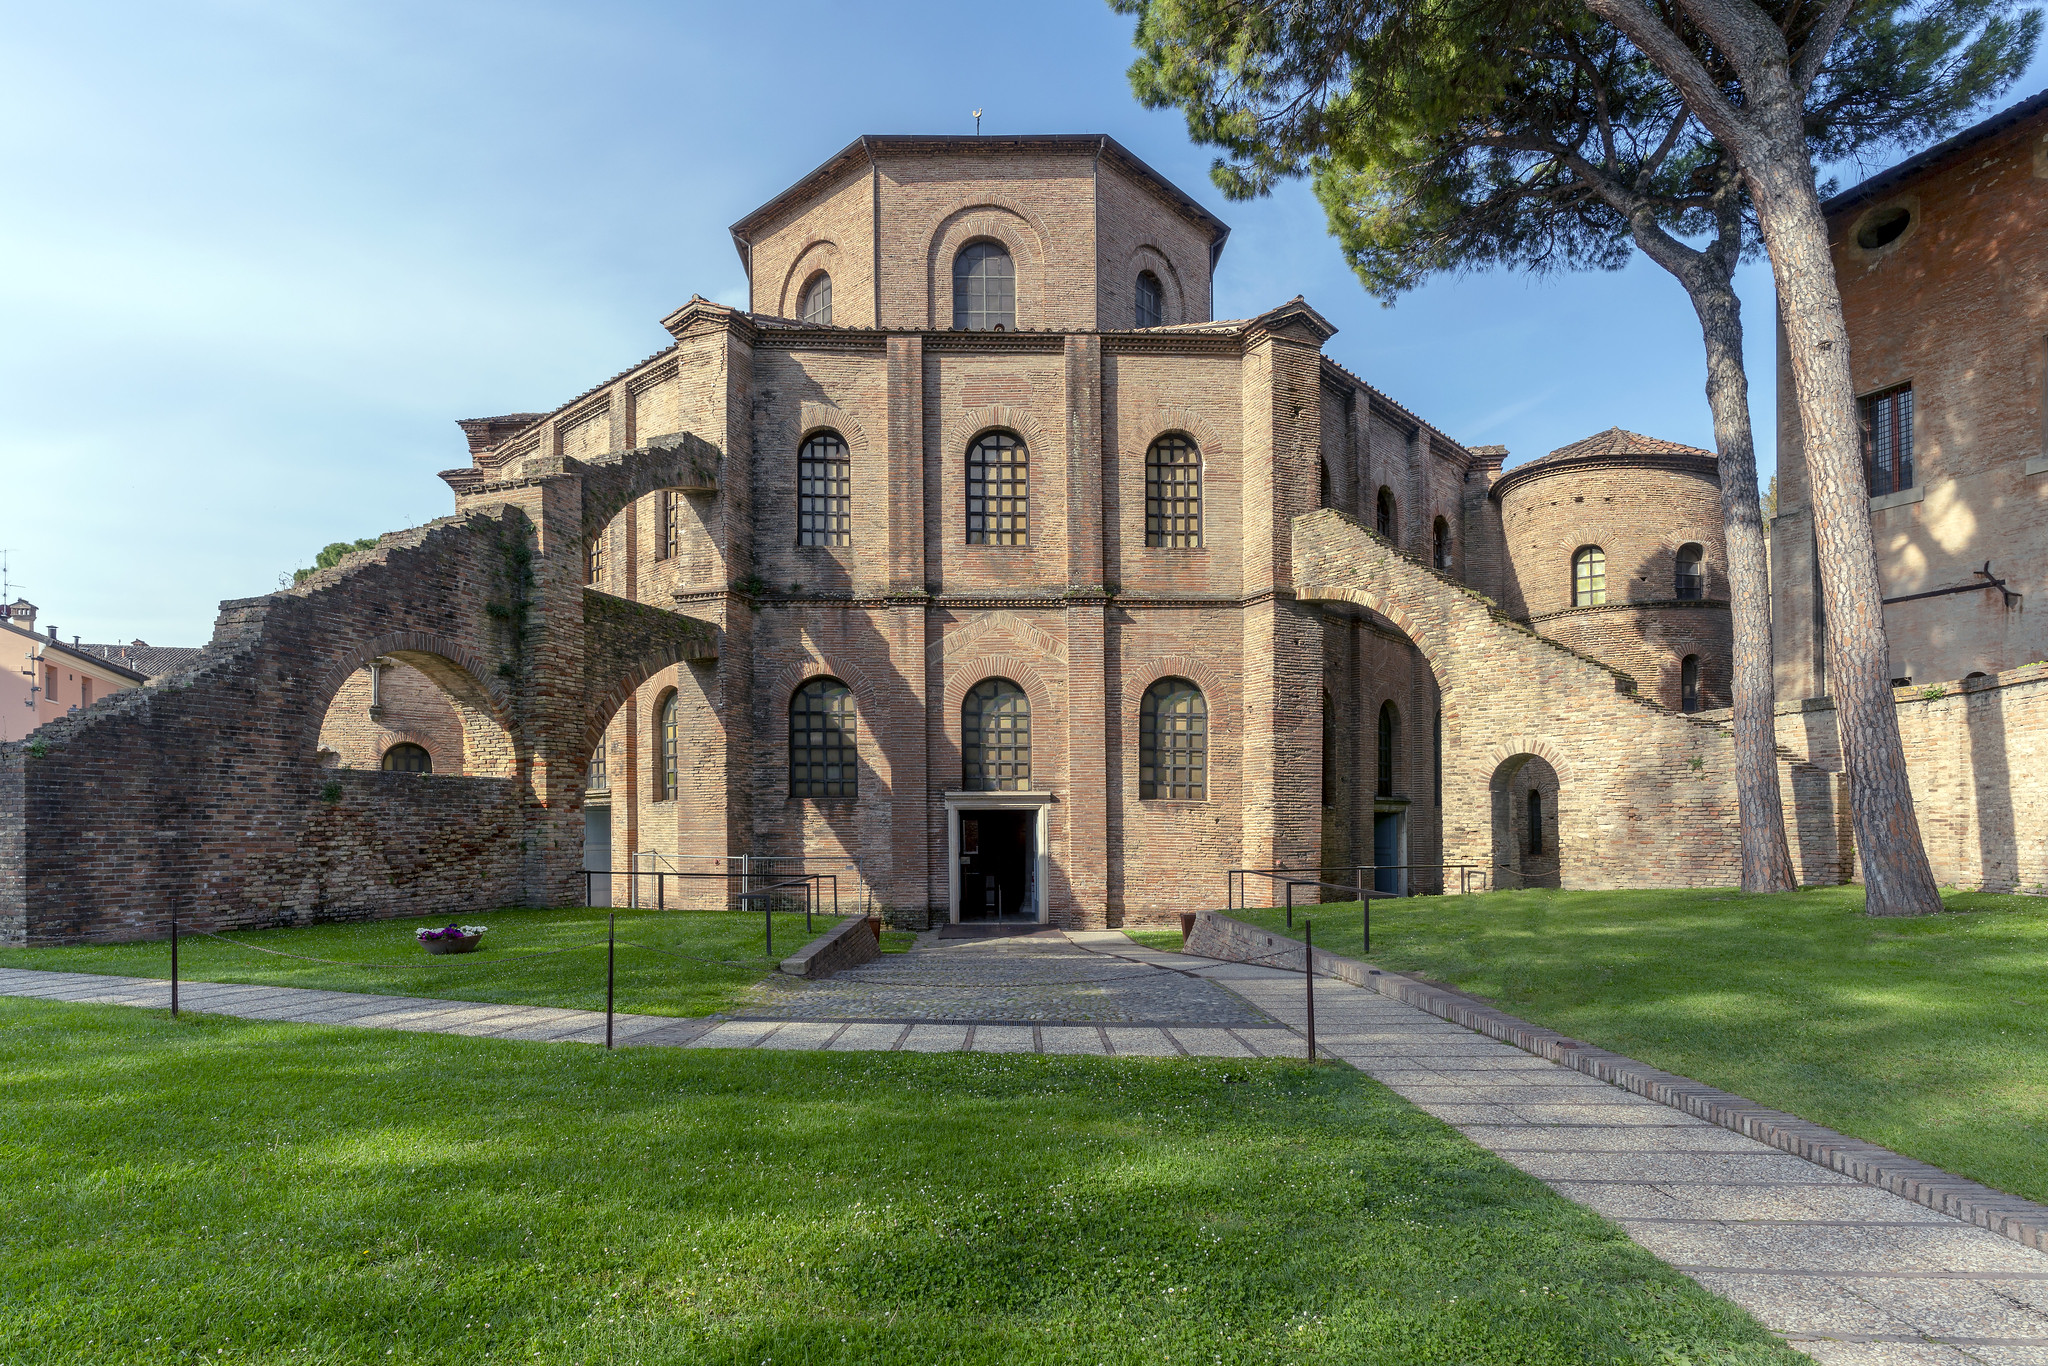 San Vitale, begun c. late 520s, consecrated 547, mosaics date between 546 and 556. The Church was restored 1540s, 1900, 1904, and in the 1930s, Ravenna, Italy (photo: Steven Zucker, CC BY-NC-SA 2.0)